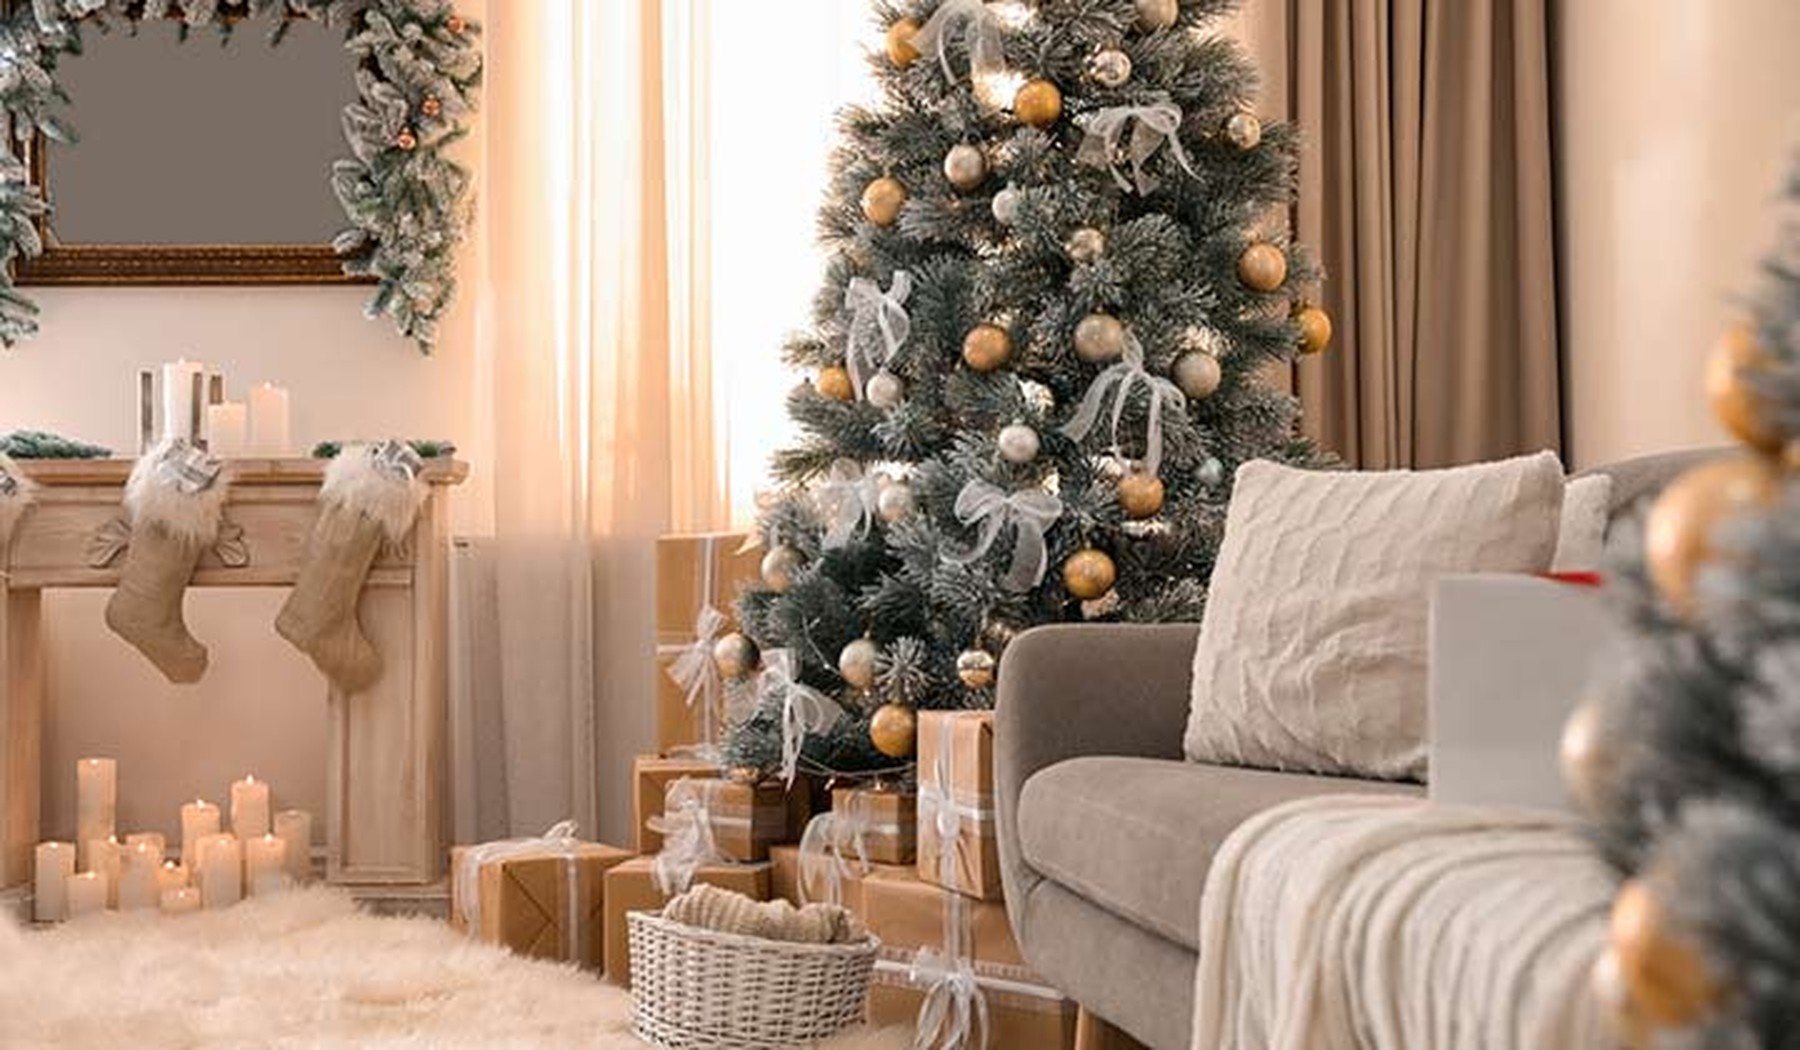 Neutral colored Christmas tree and decorations